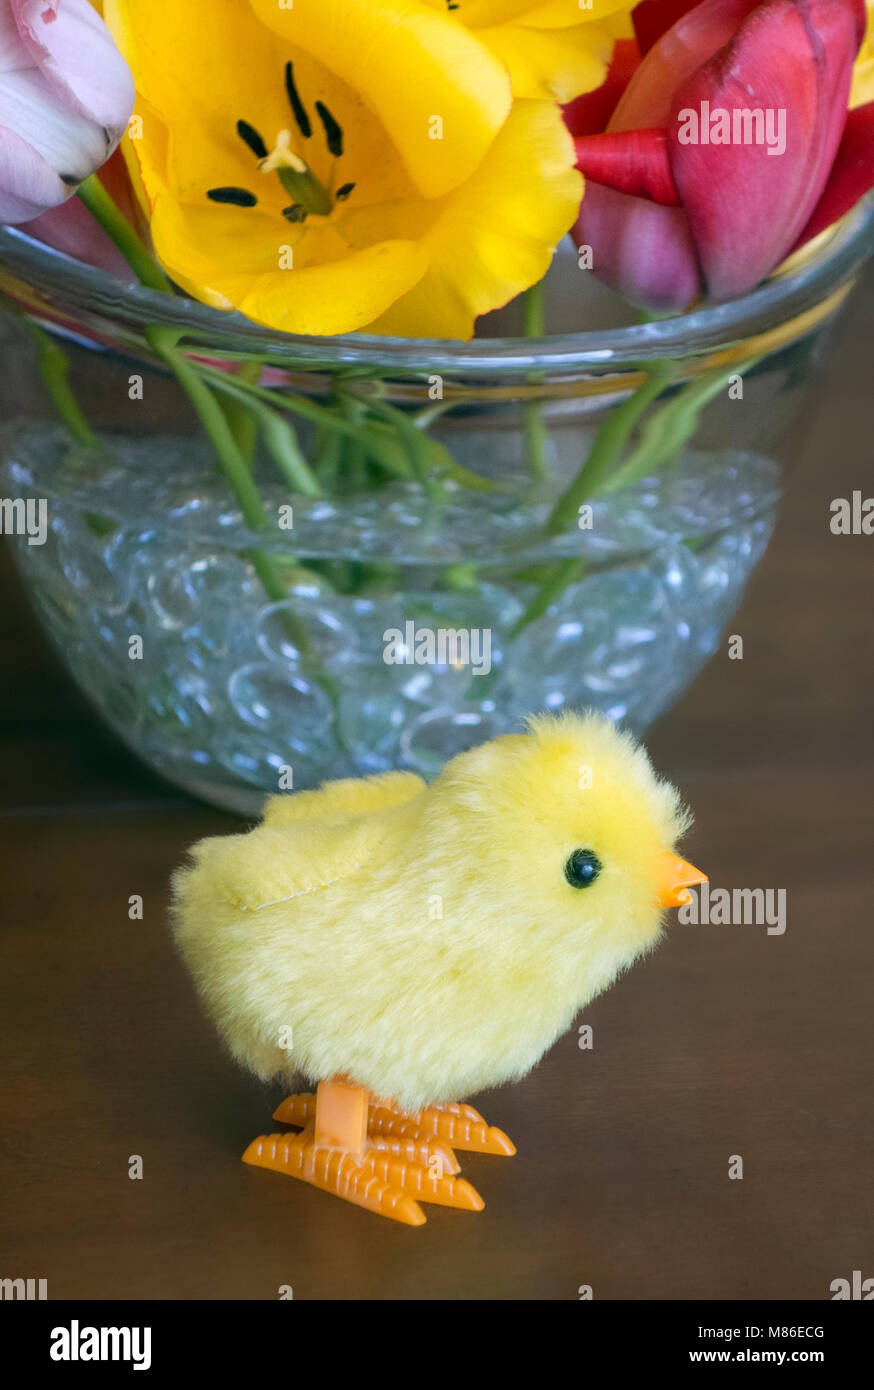 Toy baby chicken, vase, and flowers, 2017. Stock Photo